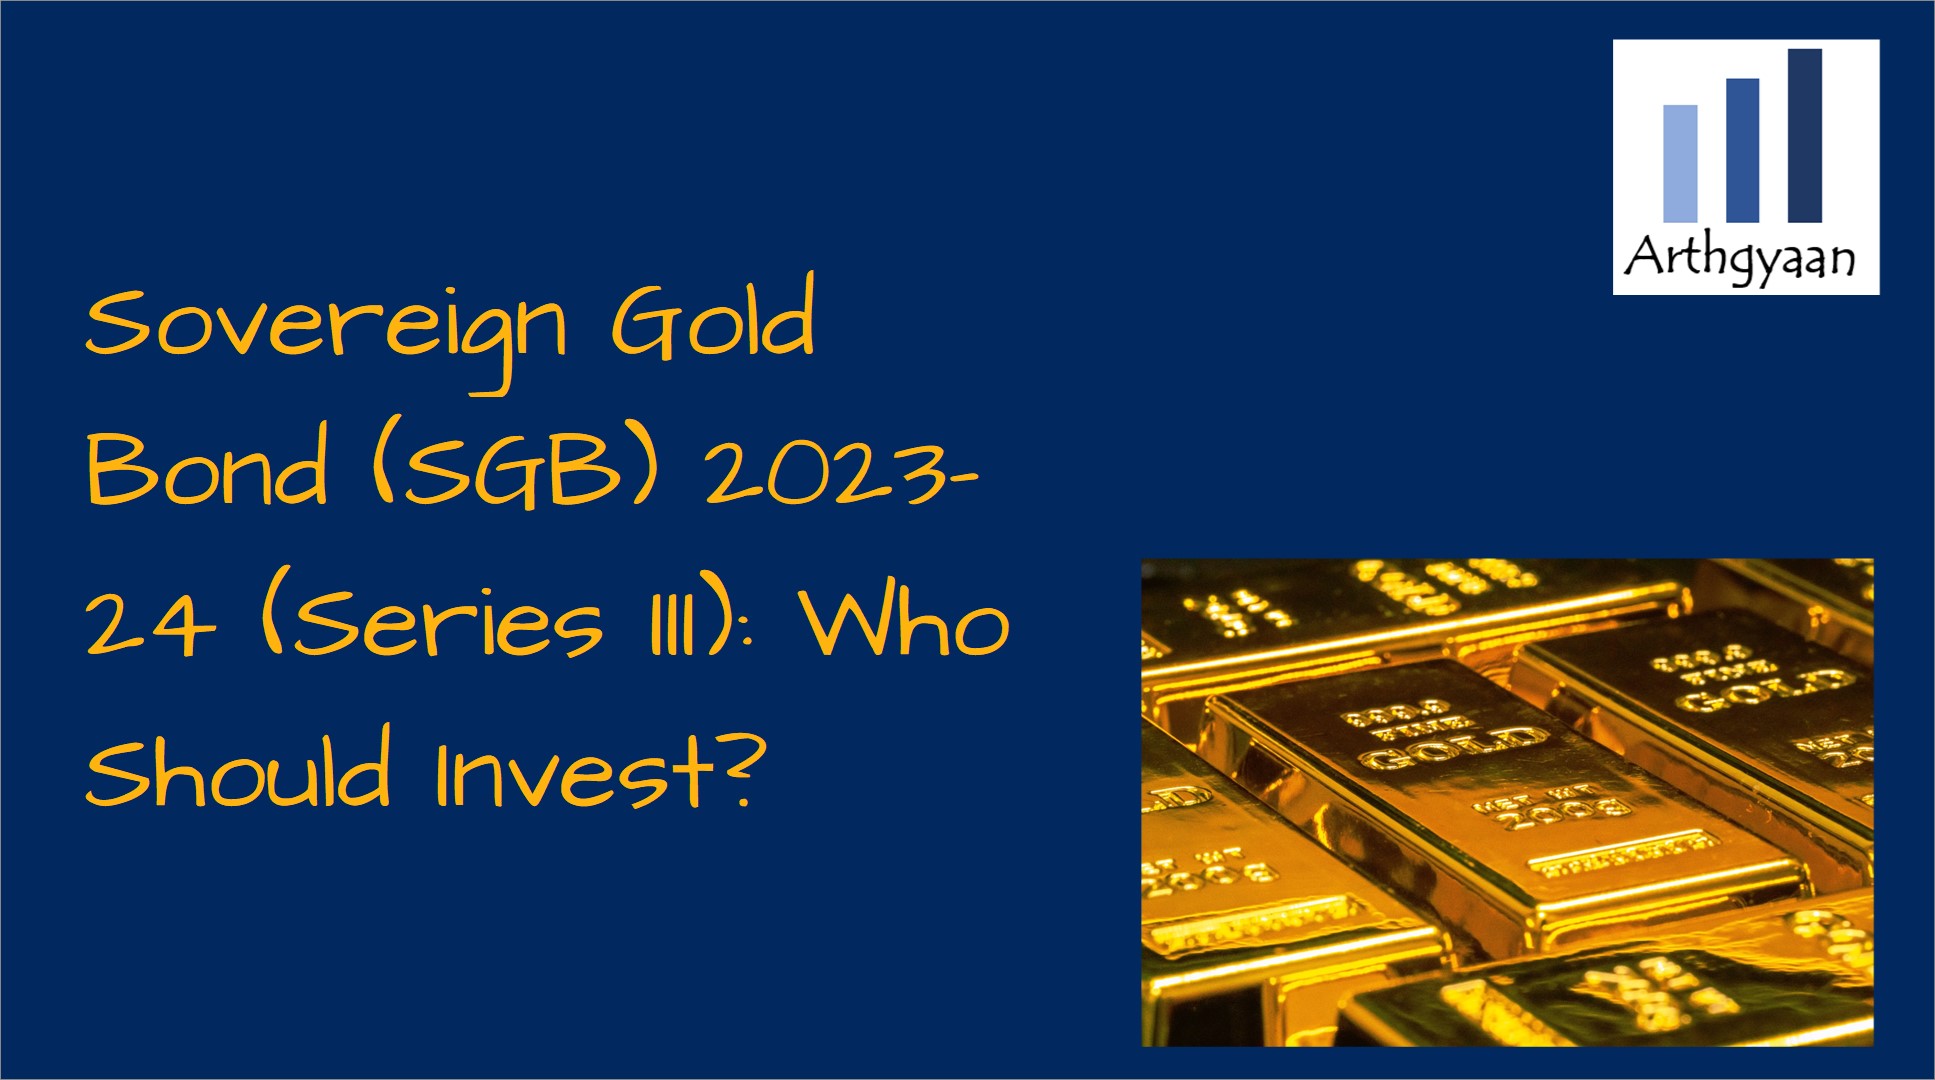 Sovereign Gold Bond (SGB) 2023-24 (Series III) priced at 6199: Who Should Invest?